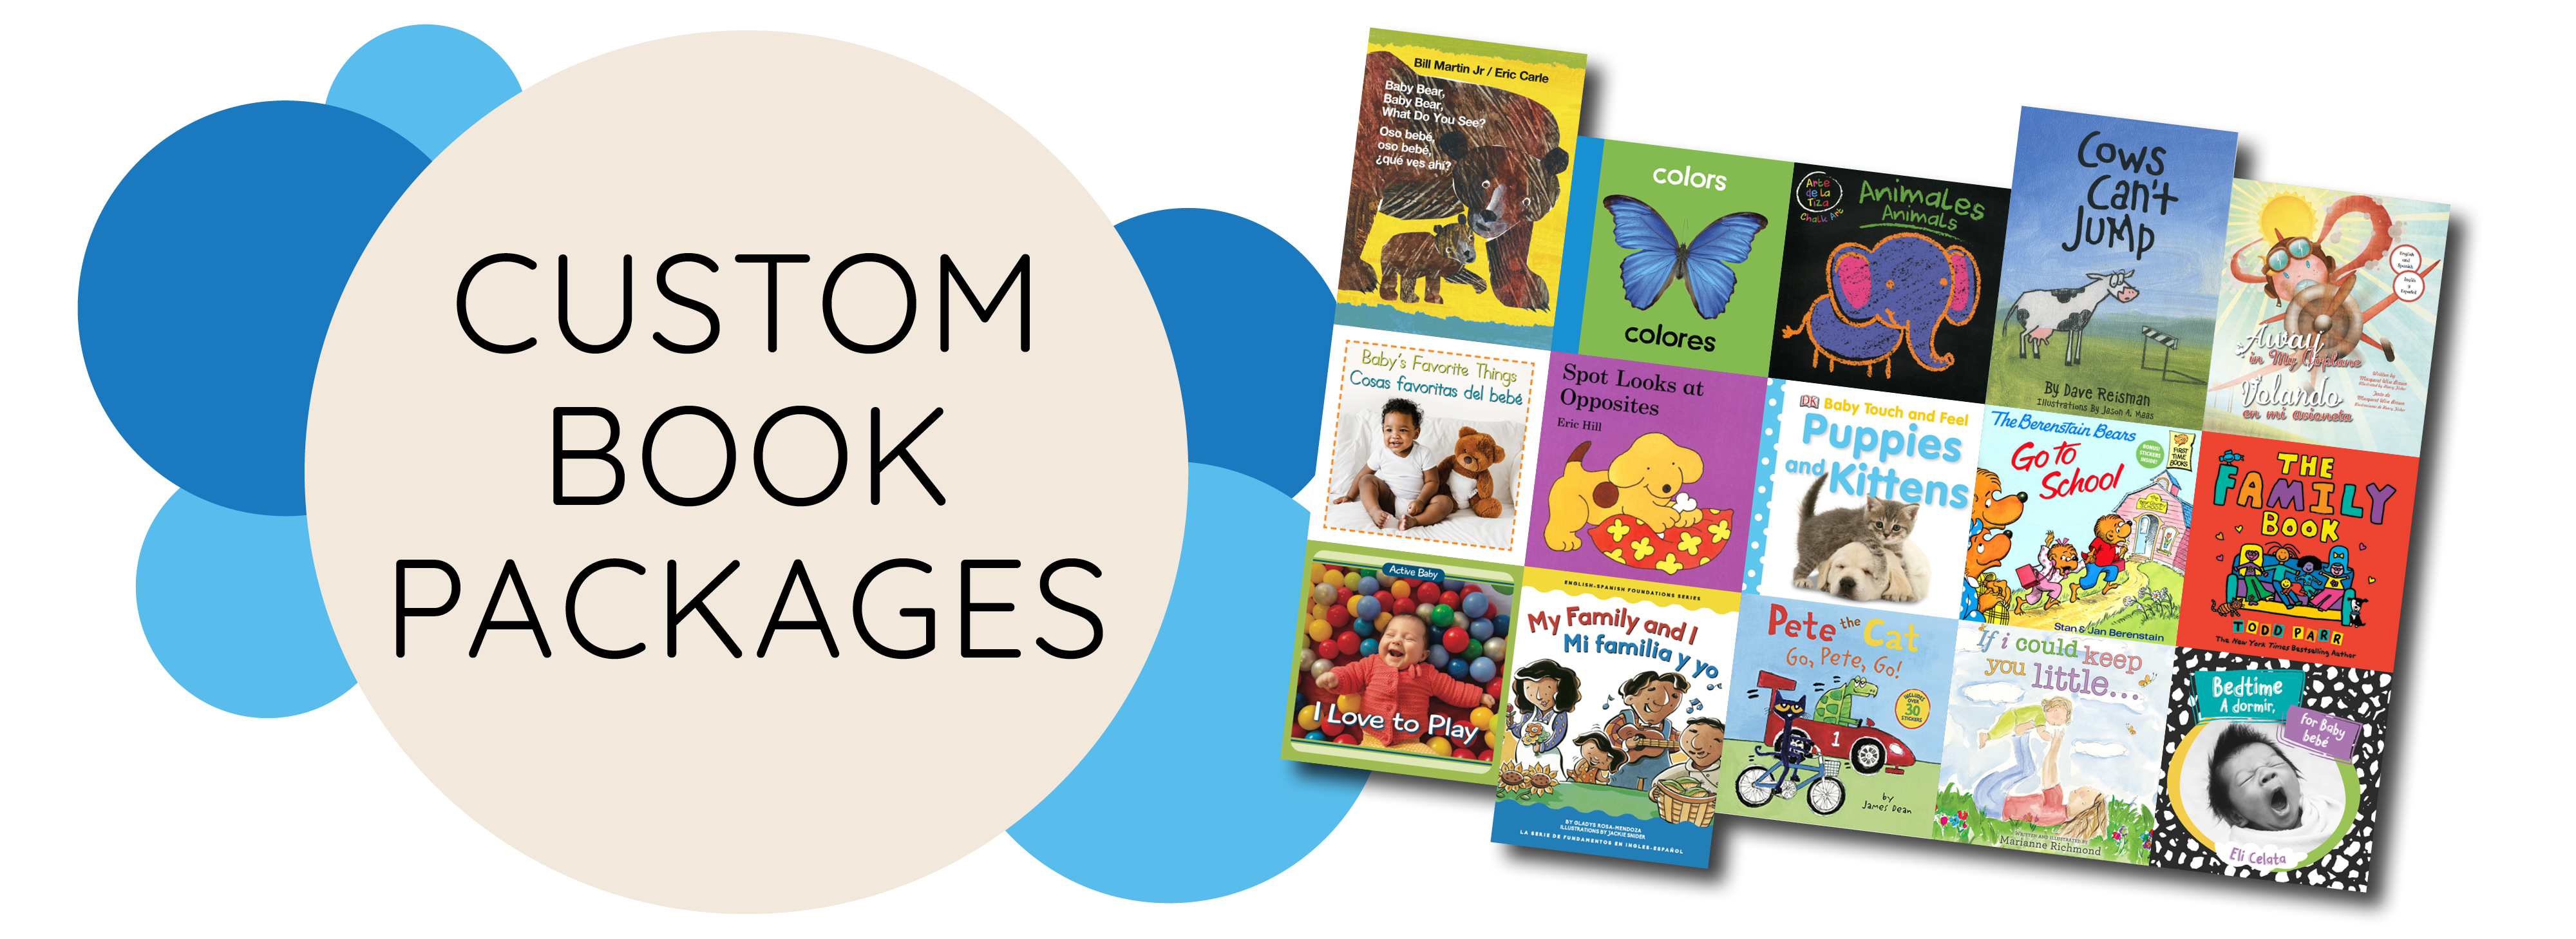 Custom Book Packages: Affordable Bulk Ordering for Multiple Sites and Budgets